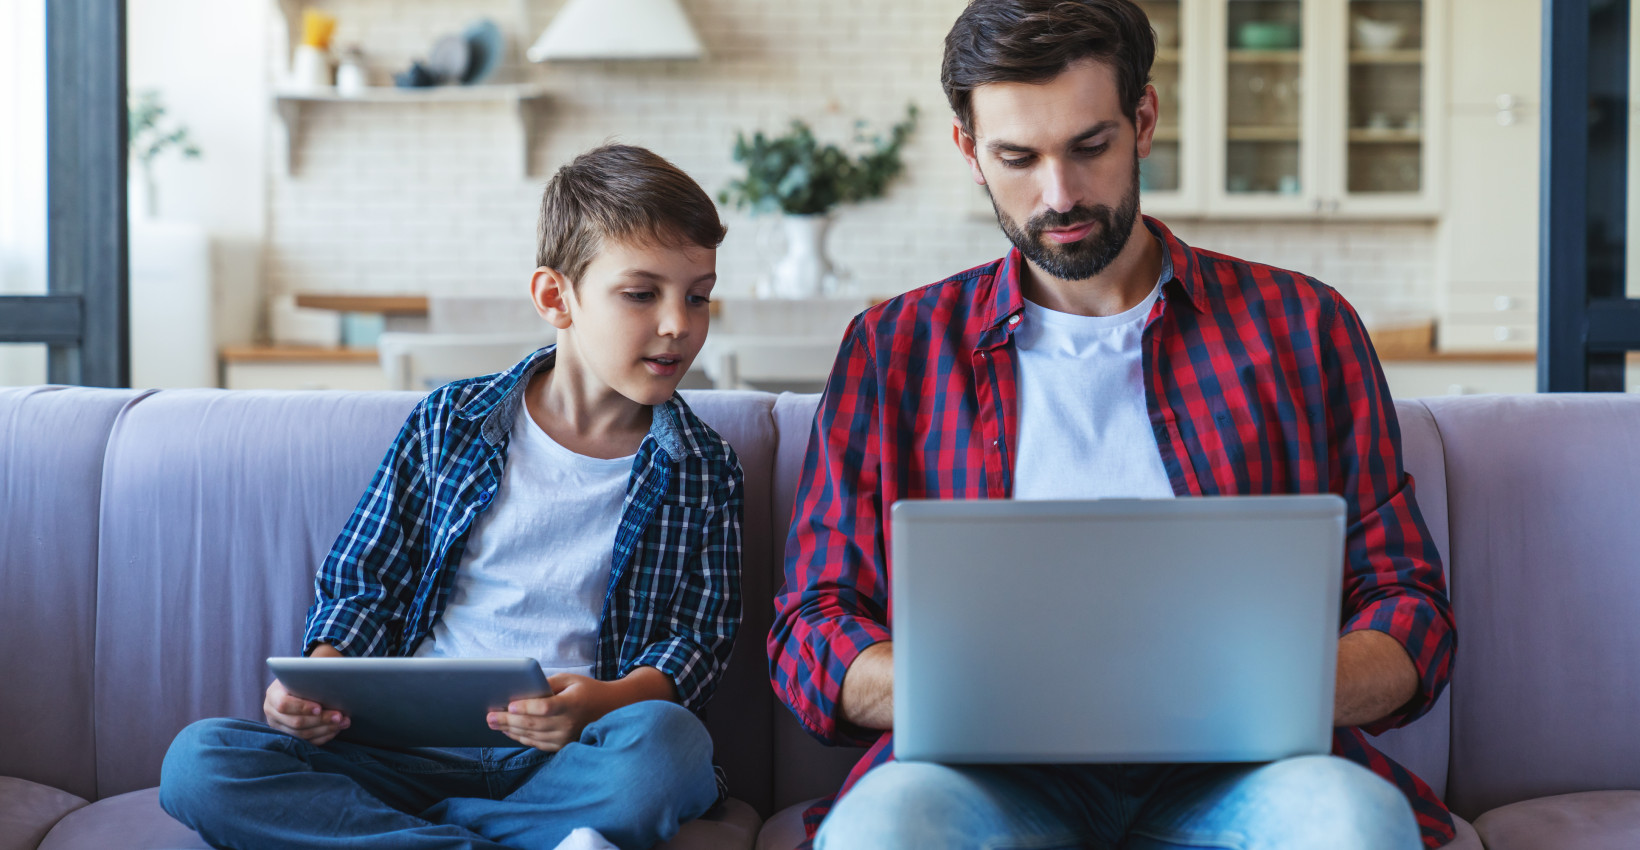 a father and son sit together on a couch looking at a laptop